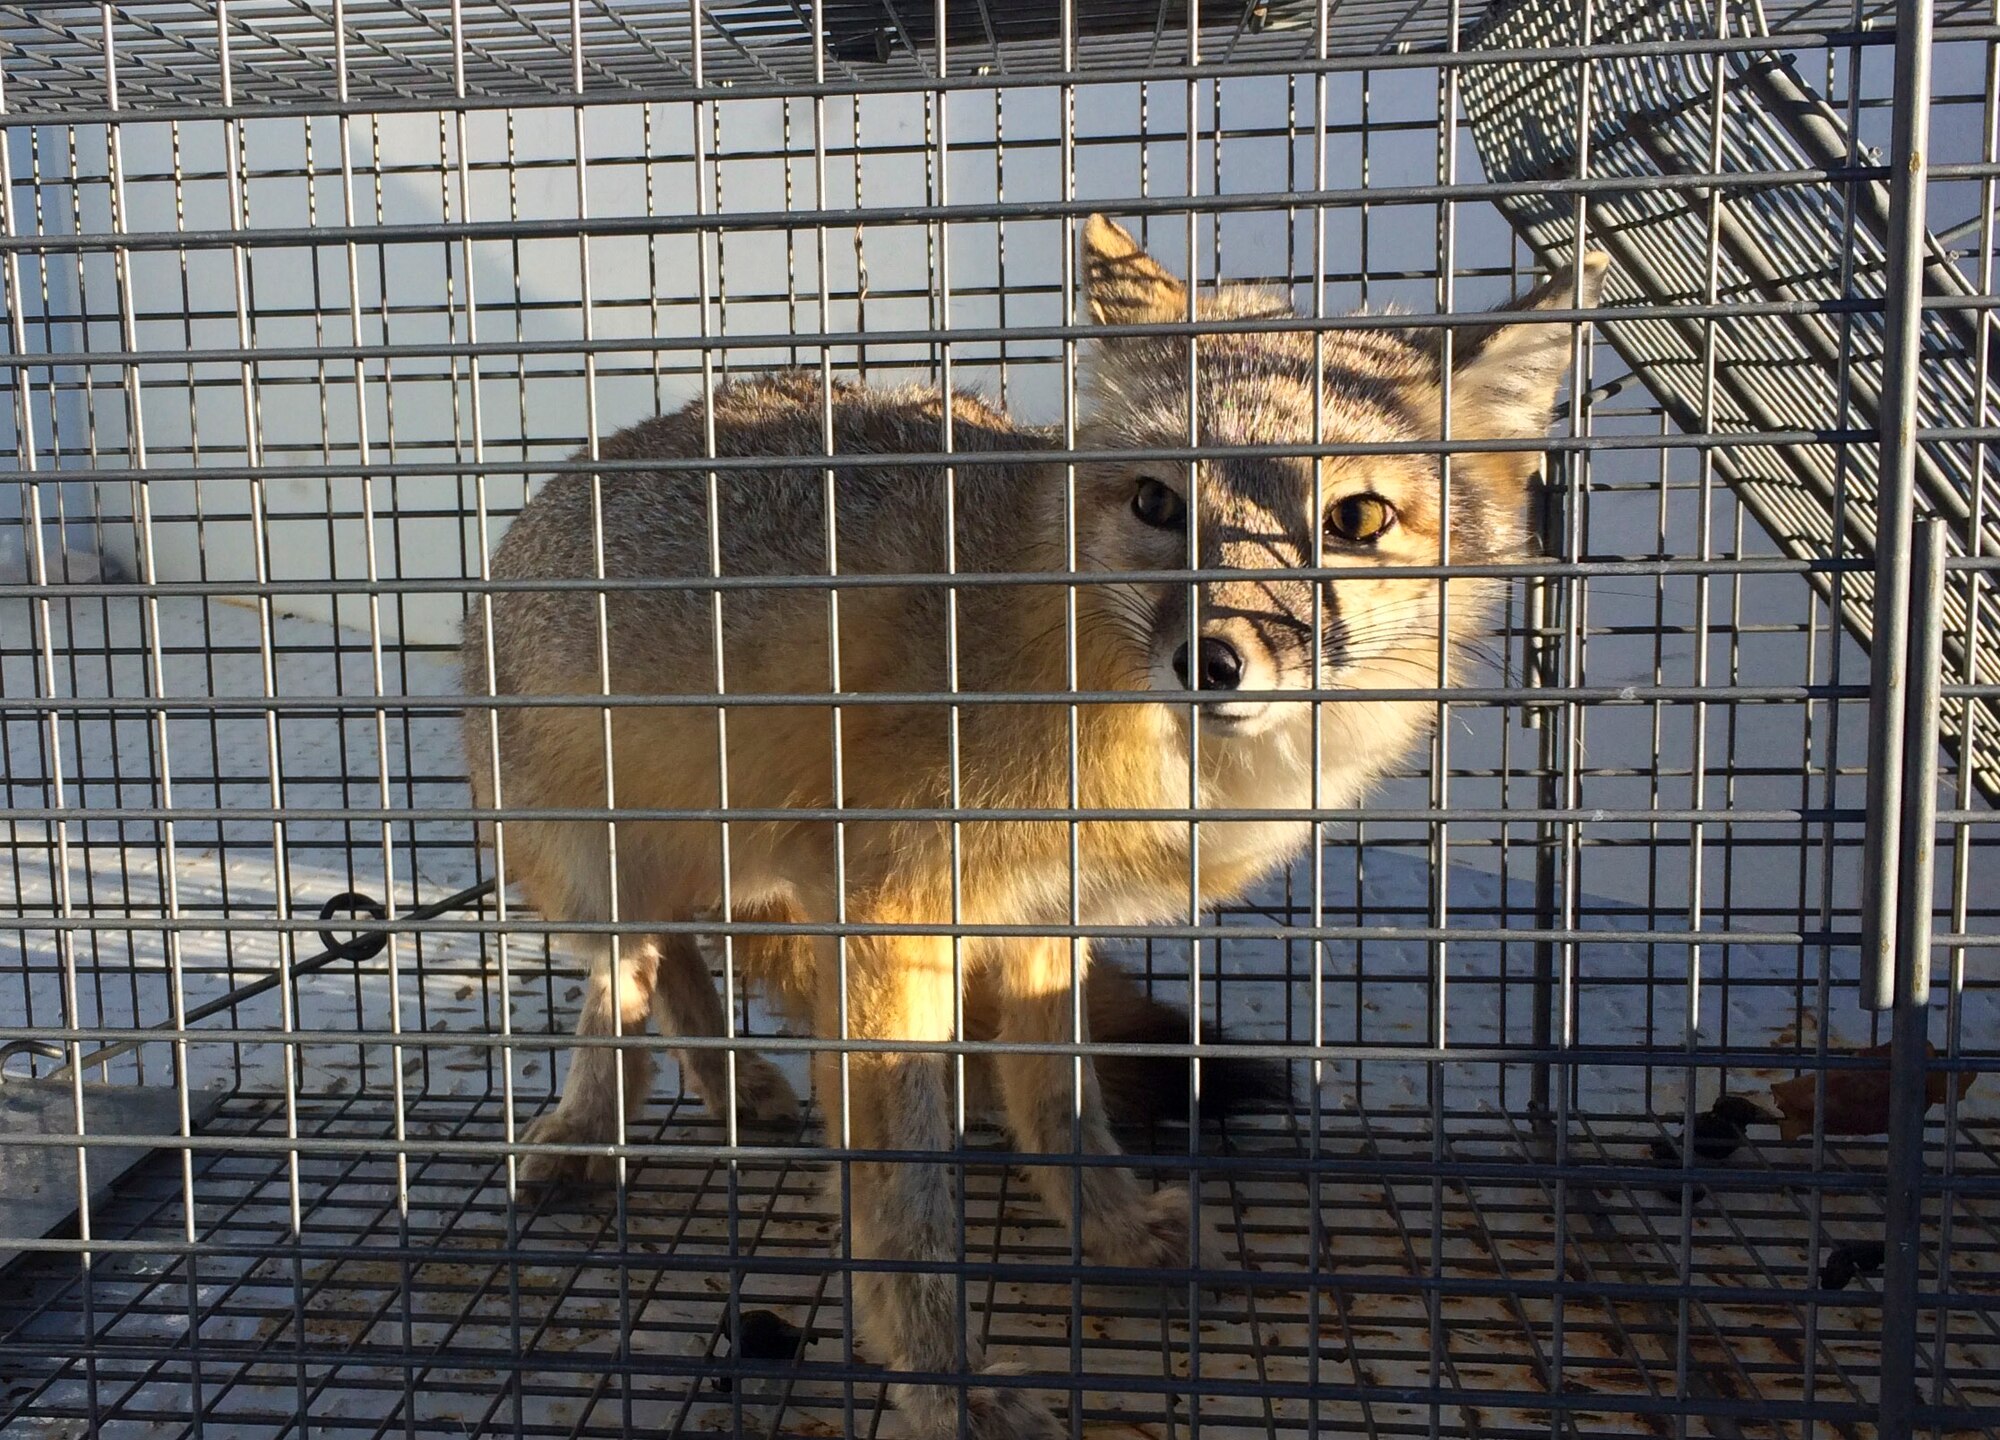 A swift fox sits in a cage on the flightline at Ellsworth Air Force Base, S.D., Feb. 23, 2016. Swift foxes are on a threatened species list and, when found, are released into the wild on base to help keep the base rodent and bird population low. To report a pest problem, call the 28th Civil Engineer Squadron pest management office at (605) 385-2521. (U.S. Air Force courtesy photo by Airman 1st Class Melissa Waszkiewicz/Released)